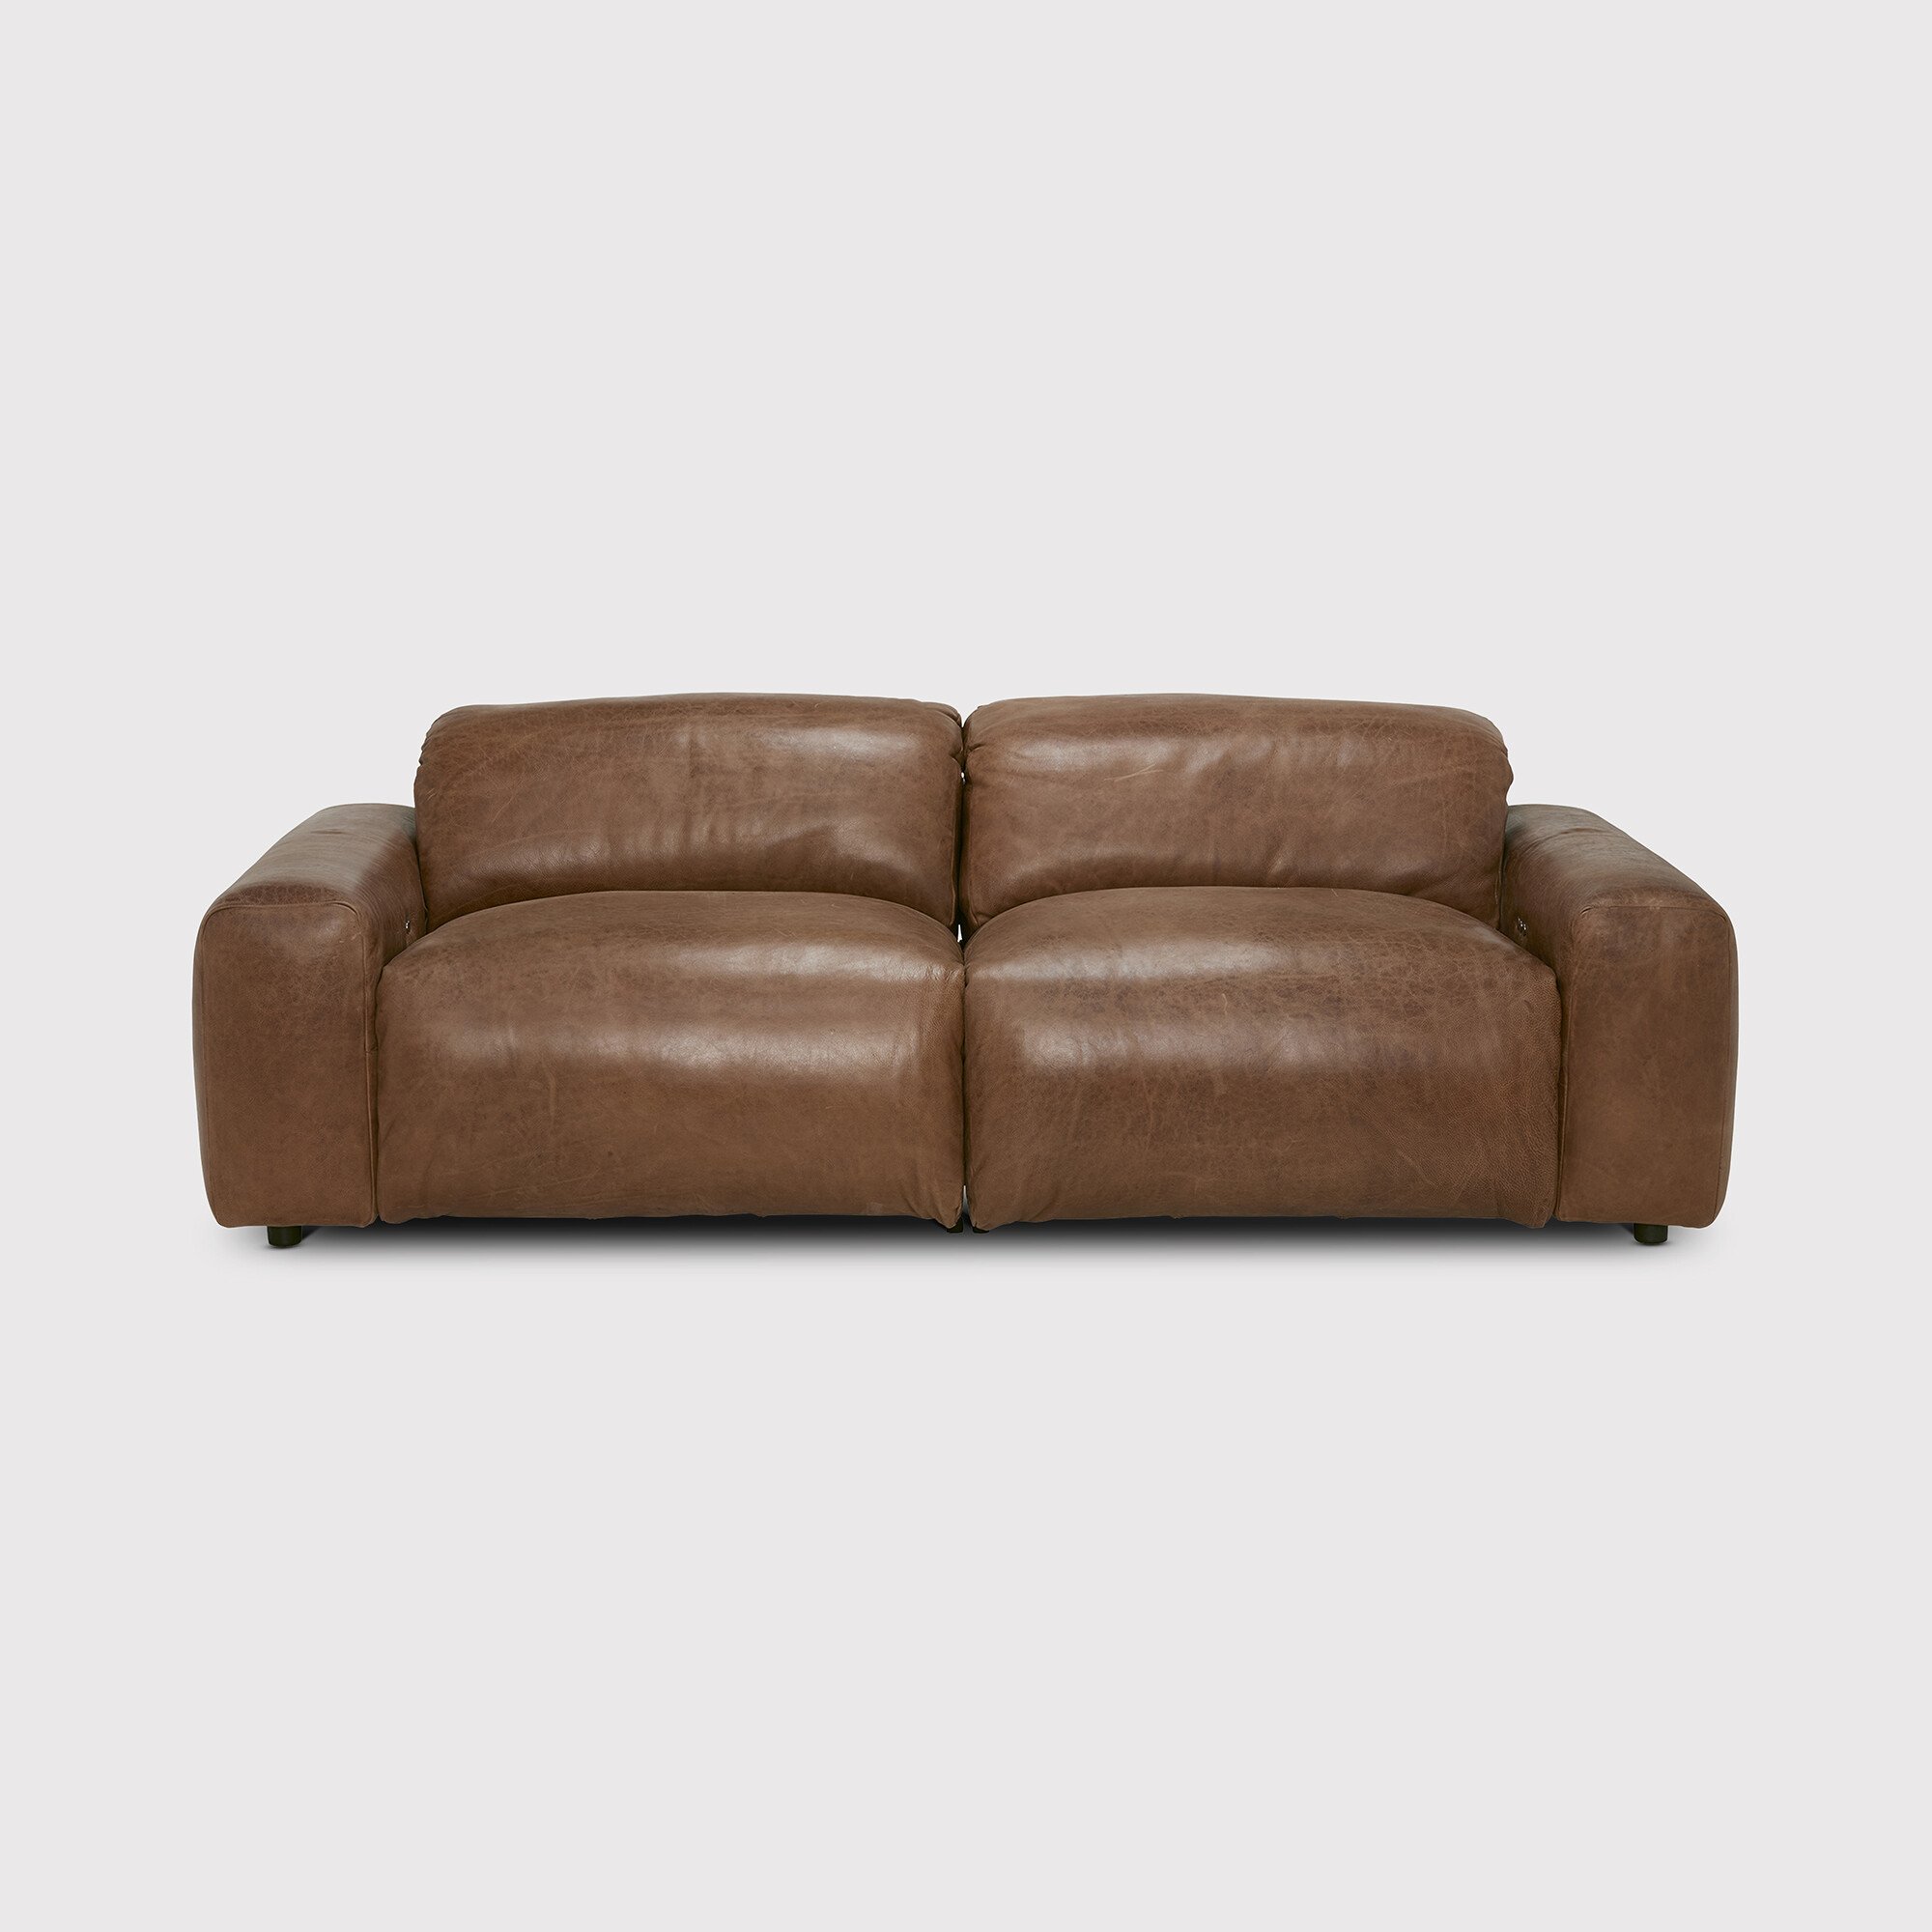 Timothy Oulton Pudgie Recliner Sofa 3 Seater, Brown Leather | Barker & Stonehouse